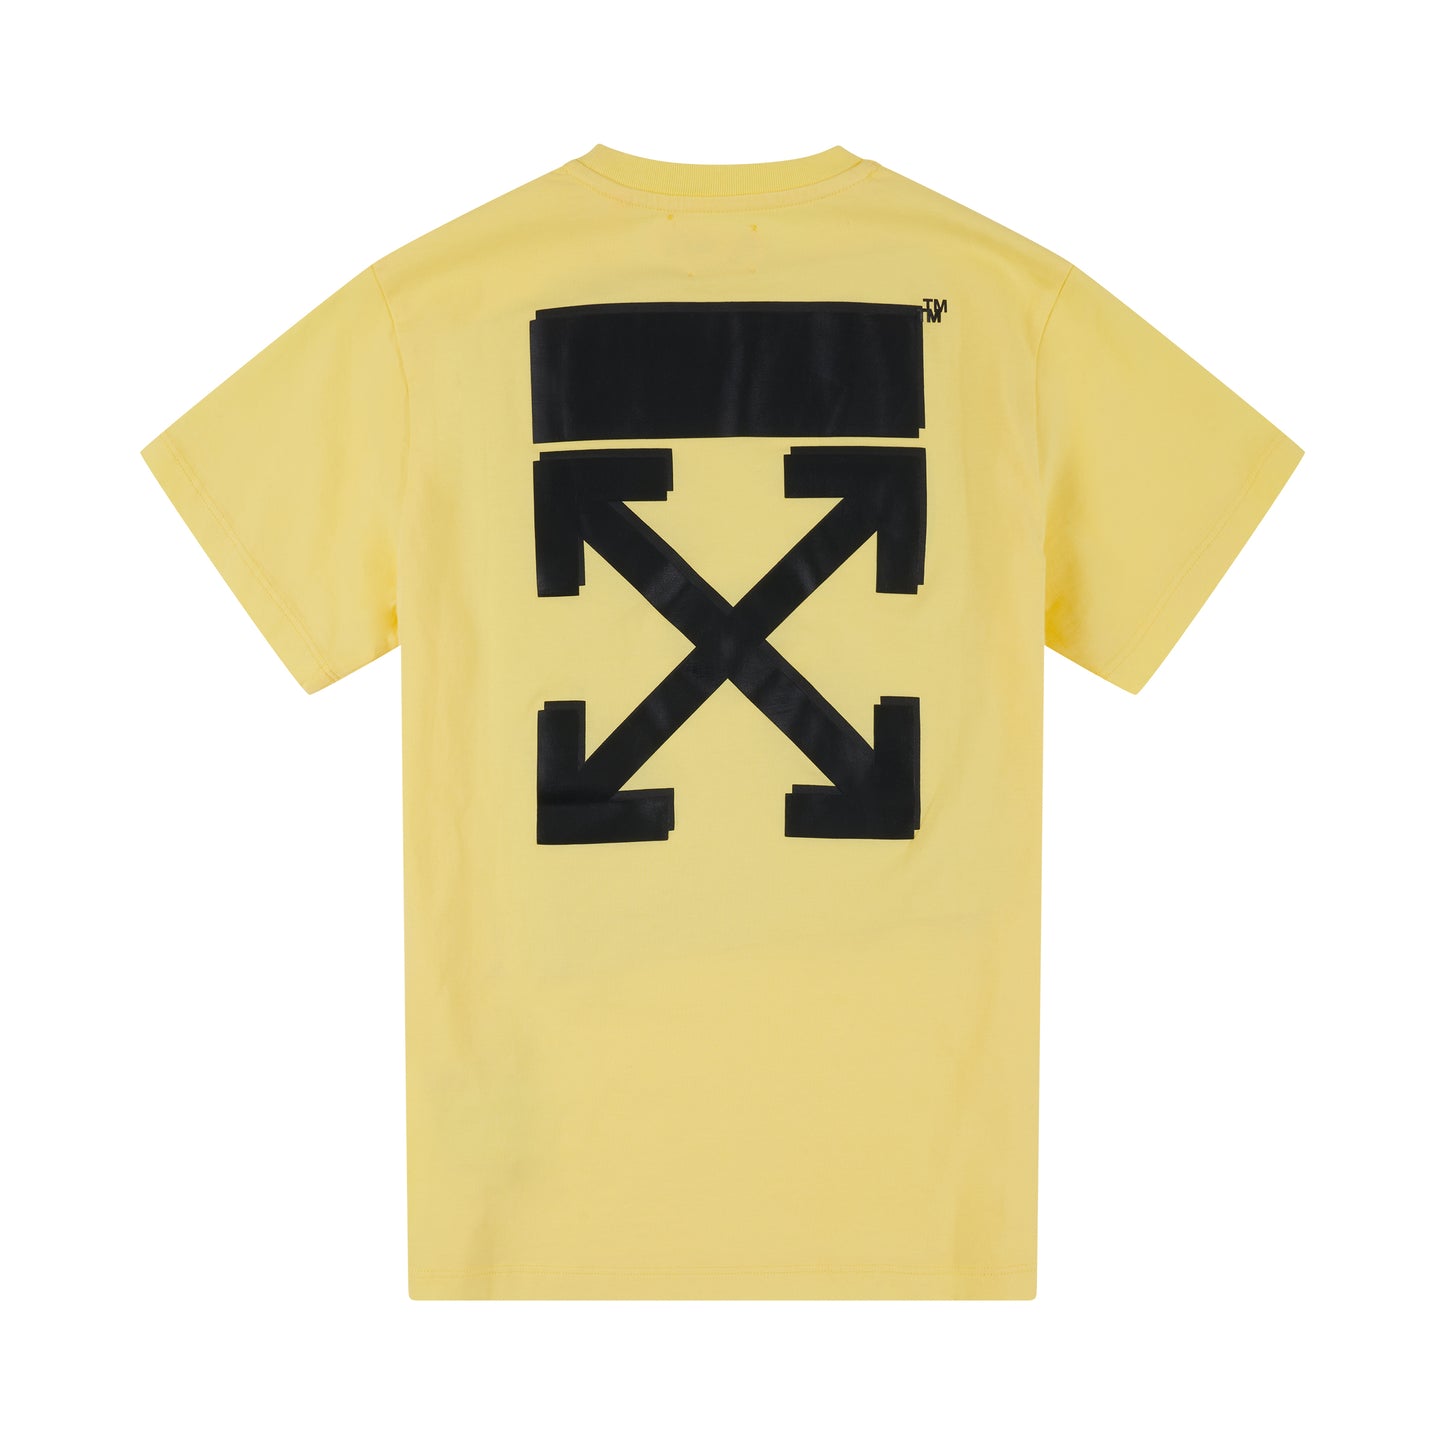 Rubber Arrow Short Sleeves T-Shirt in Yellow/Black